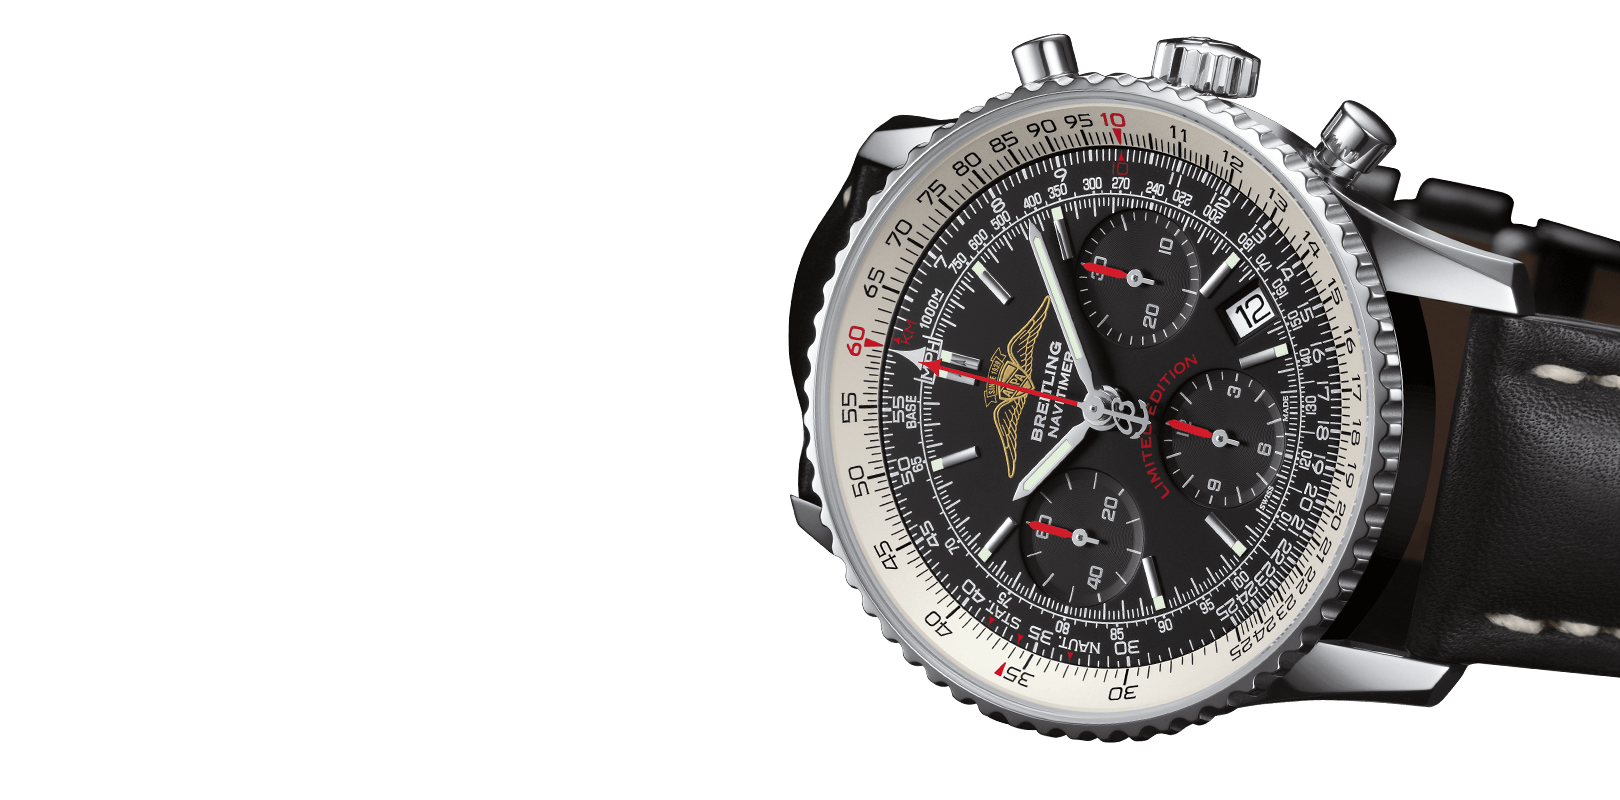 breitling Super Ocean Heritage II B20 46 Starr Automata Reference AB2020 B and p NP 4850 s 0080